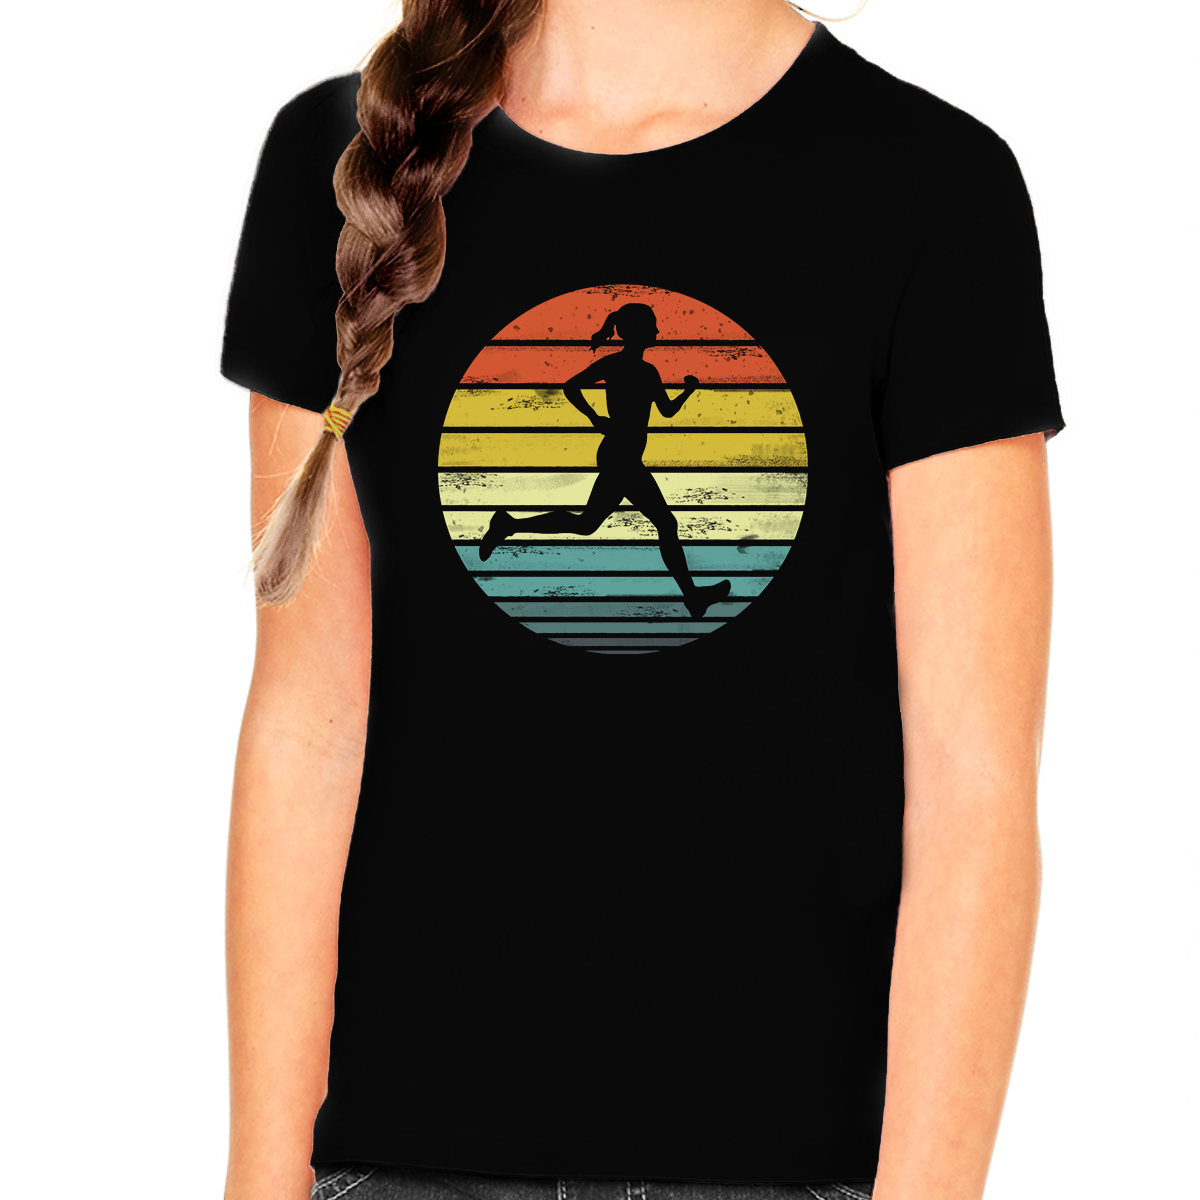 Vintage Trail Running TShirts for Girls Vintage Running Graphic Tees for Runners Marathon, 5k, 10k - Fire Fit Designs